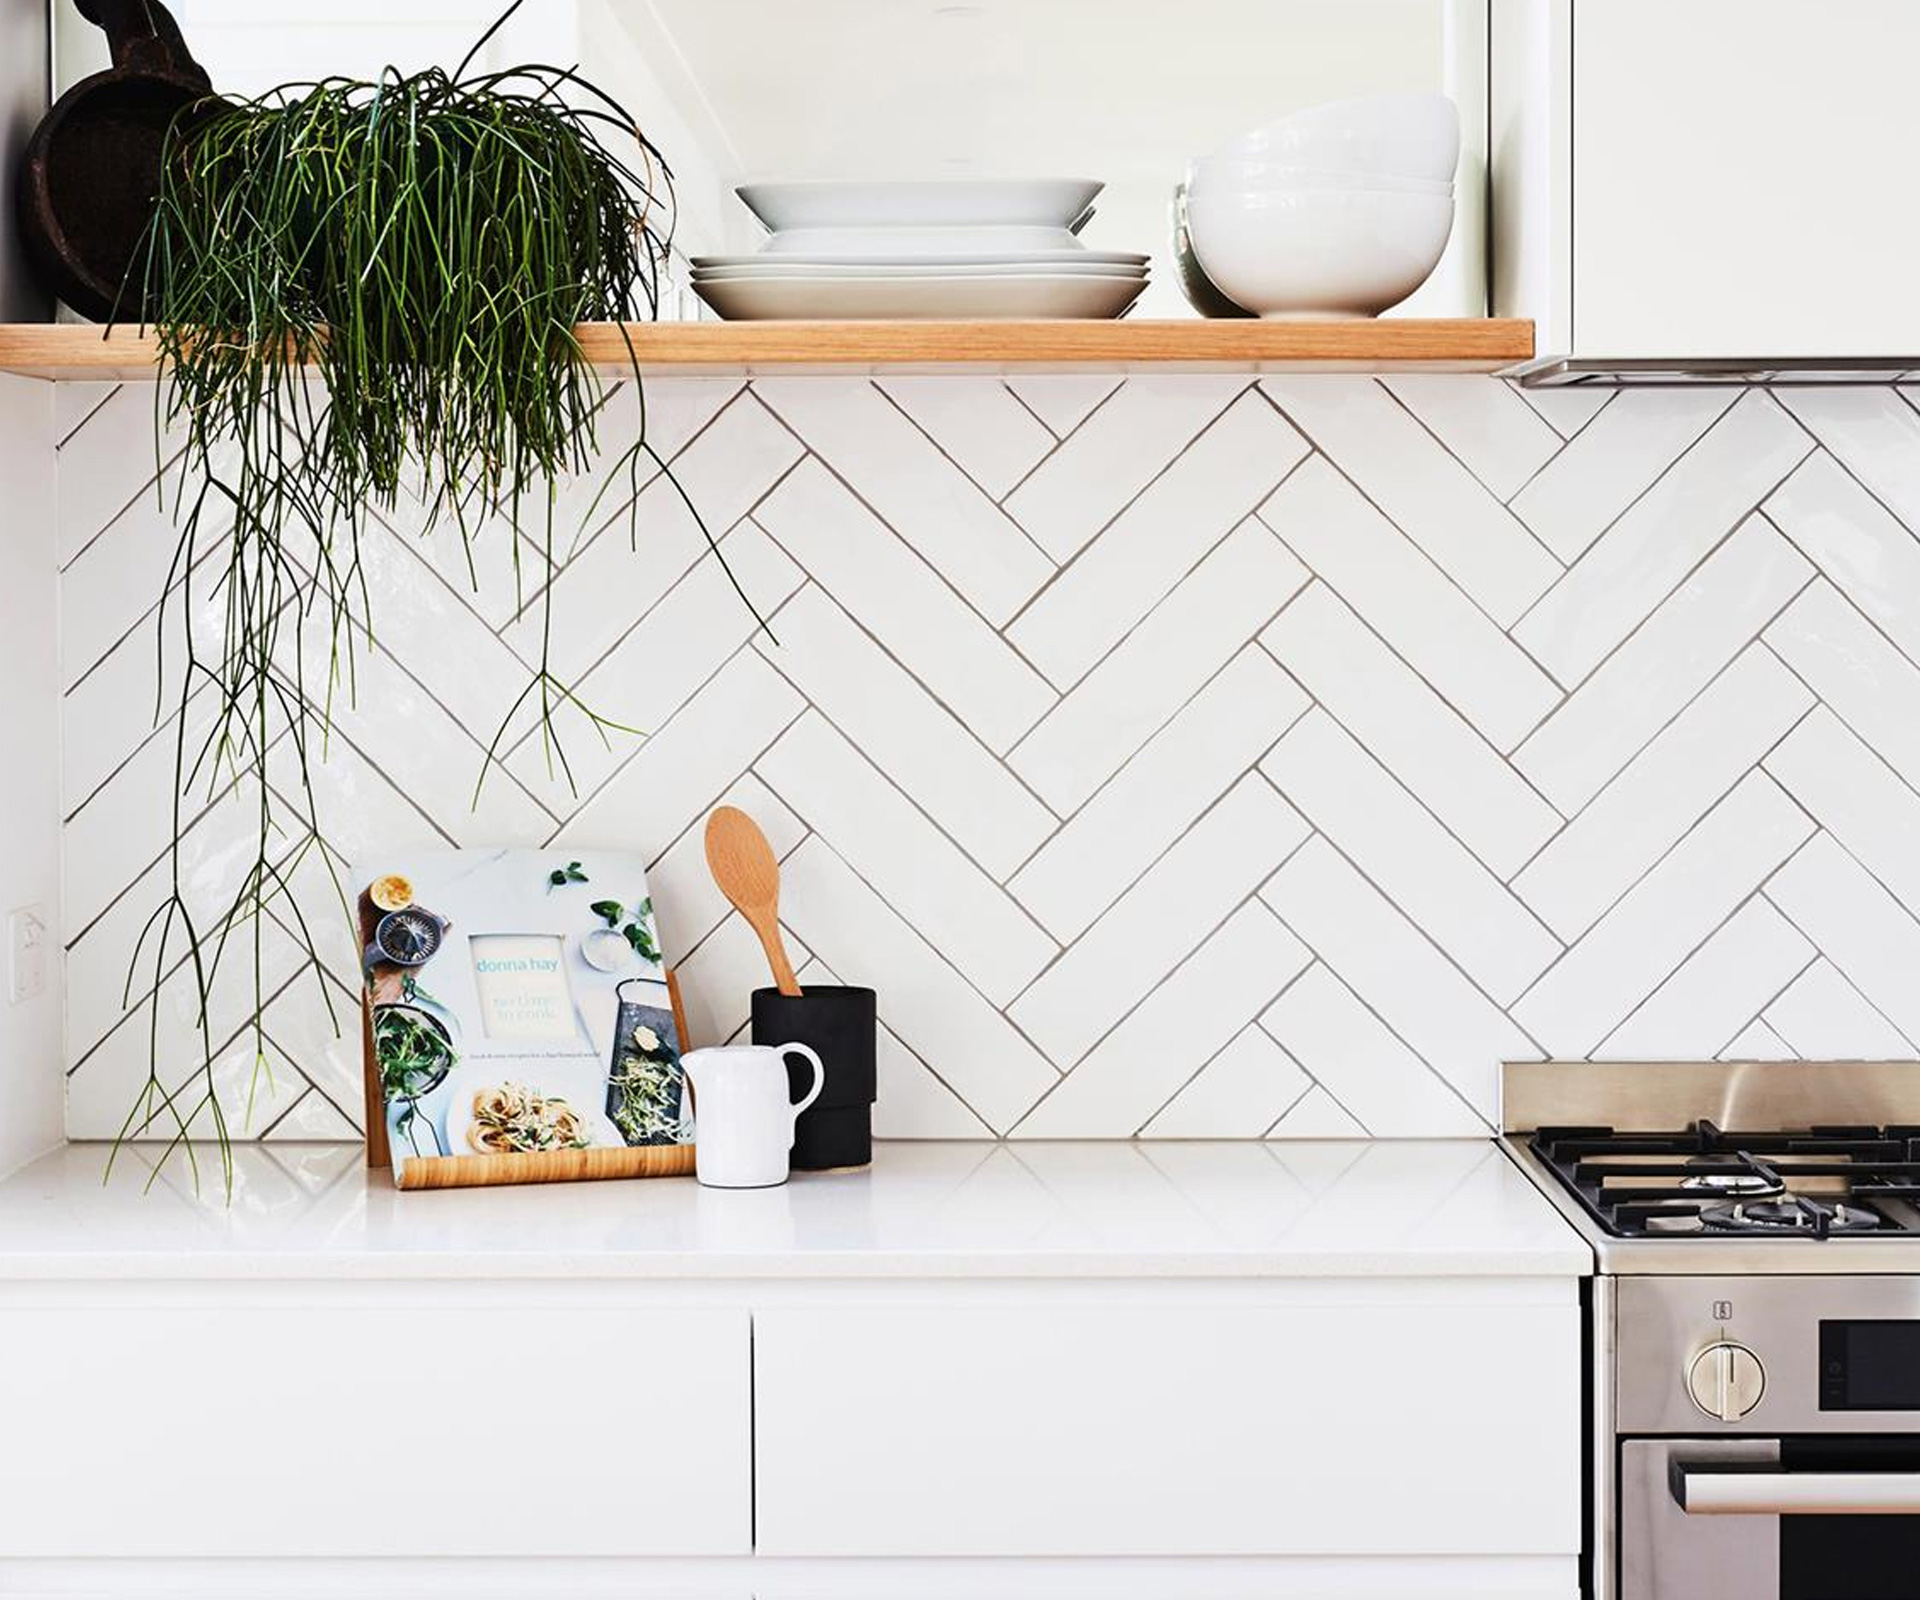 5 different subway tile patterns to try in your next renovation